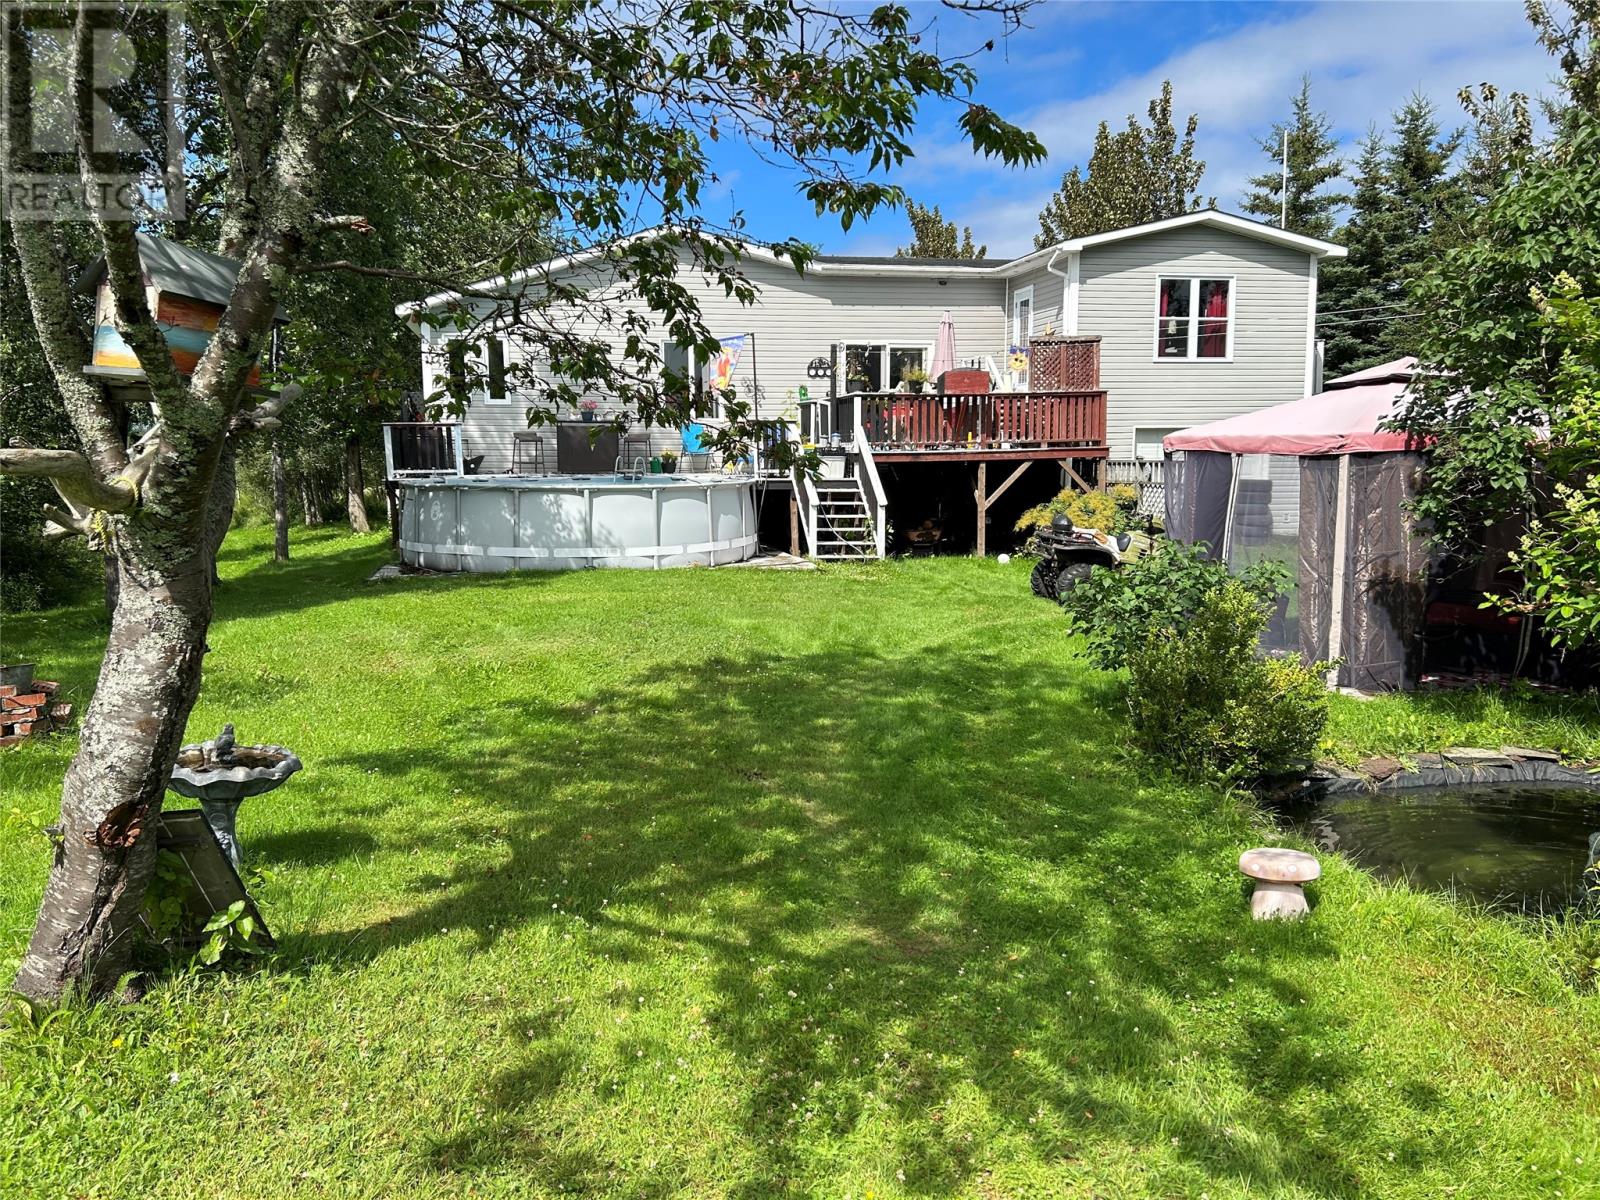 115 Road to the Isles, Campbellton, A0G1L0, 4 Bedrooms Bedrooms, ,3 BathroomsBathrooms,Single Family,For sale,Road to the Isles,1262415